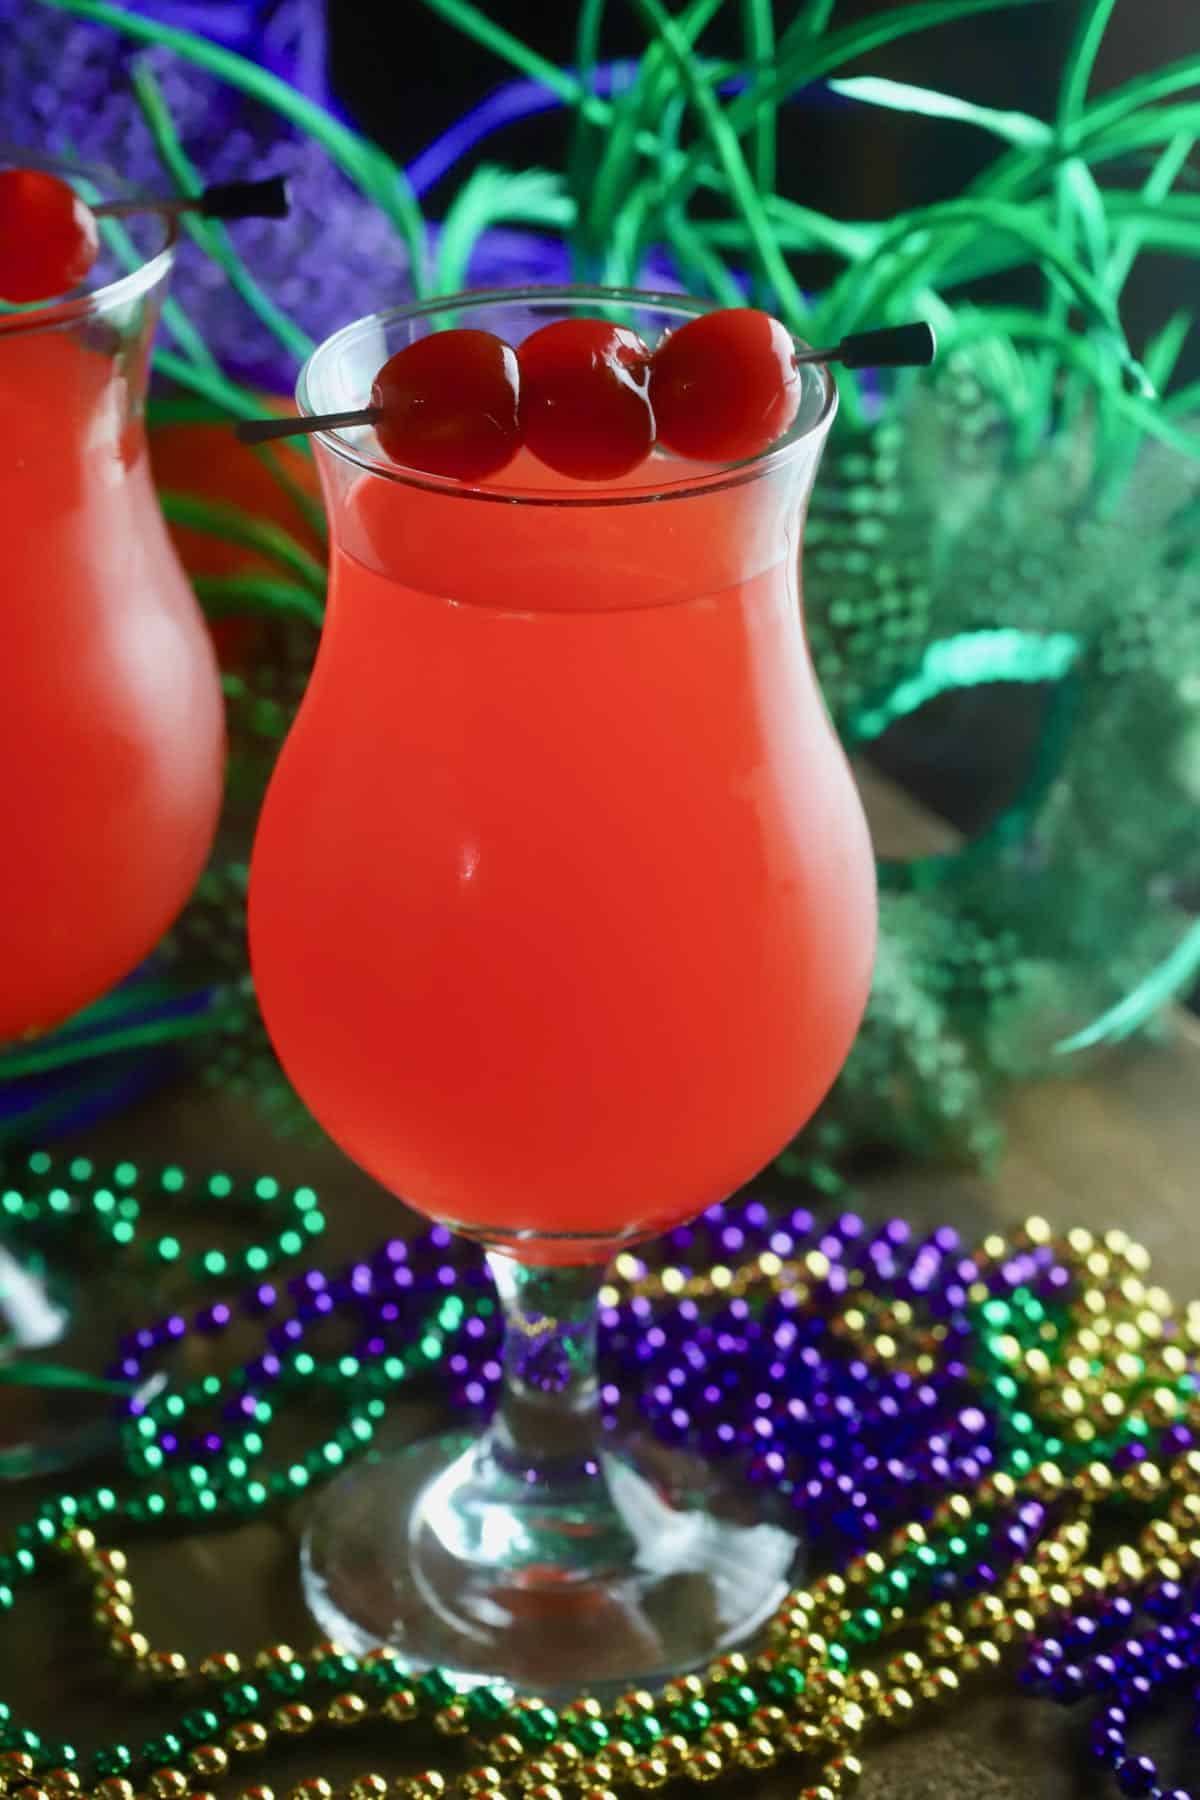 A hurricane cocktail garnished with cherries.